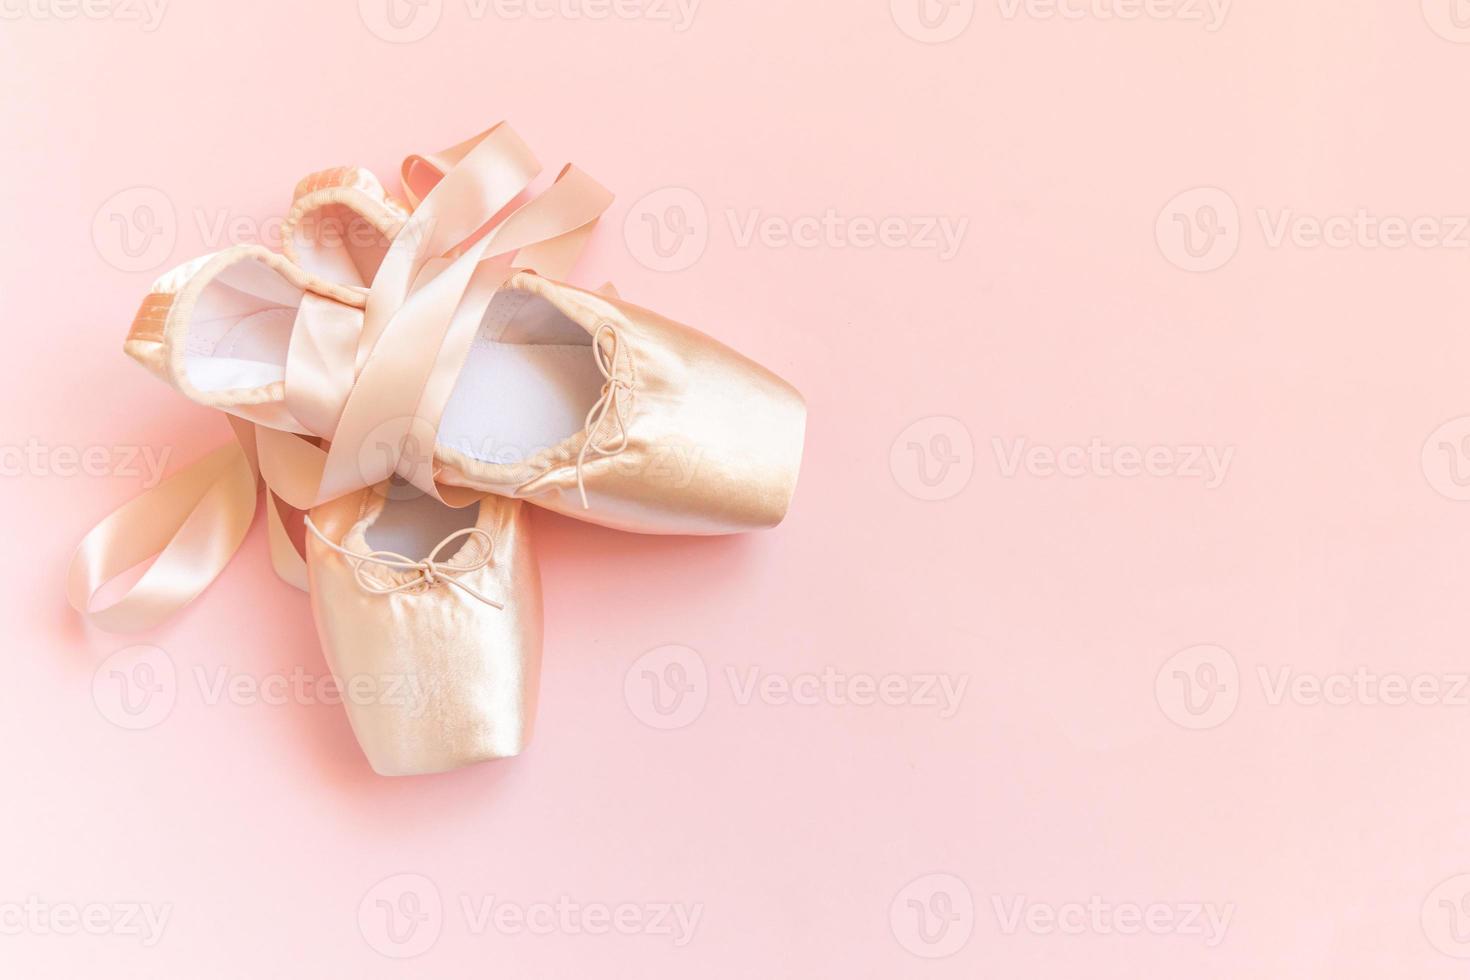 New pastel beige ballet shoes with satin ribbon isolated on pink background. Ballerina classical pointe shoes for dance training. Ballet school concept. Top view flat lay, copy space photo